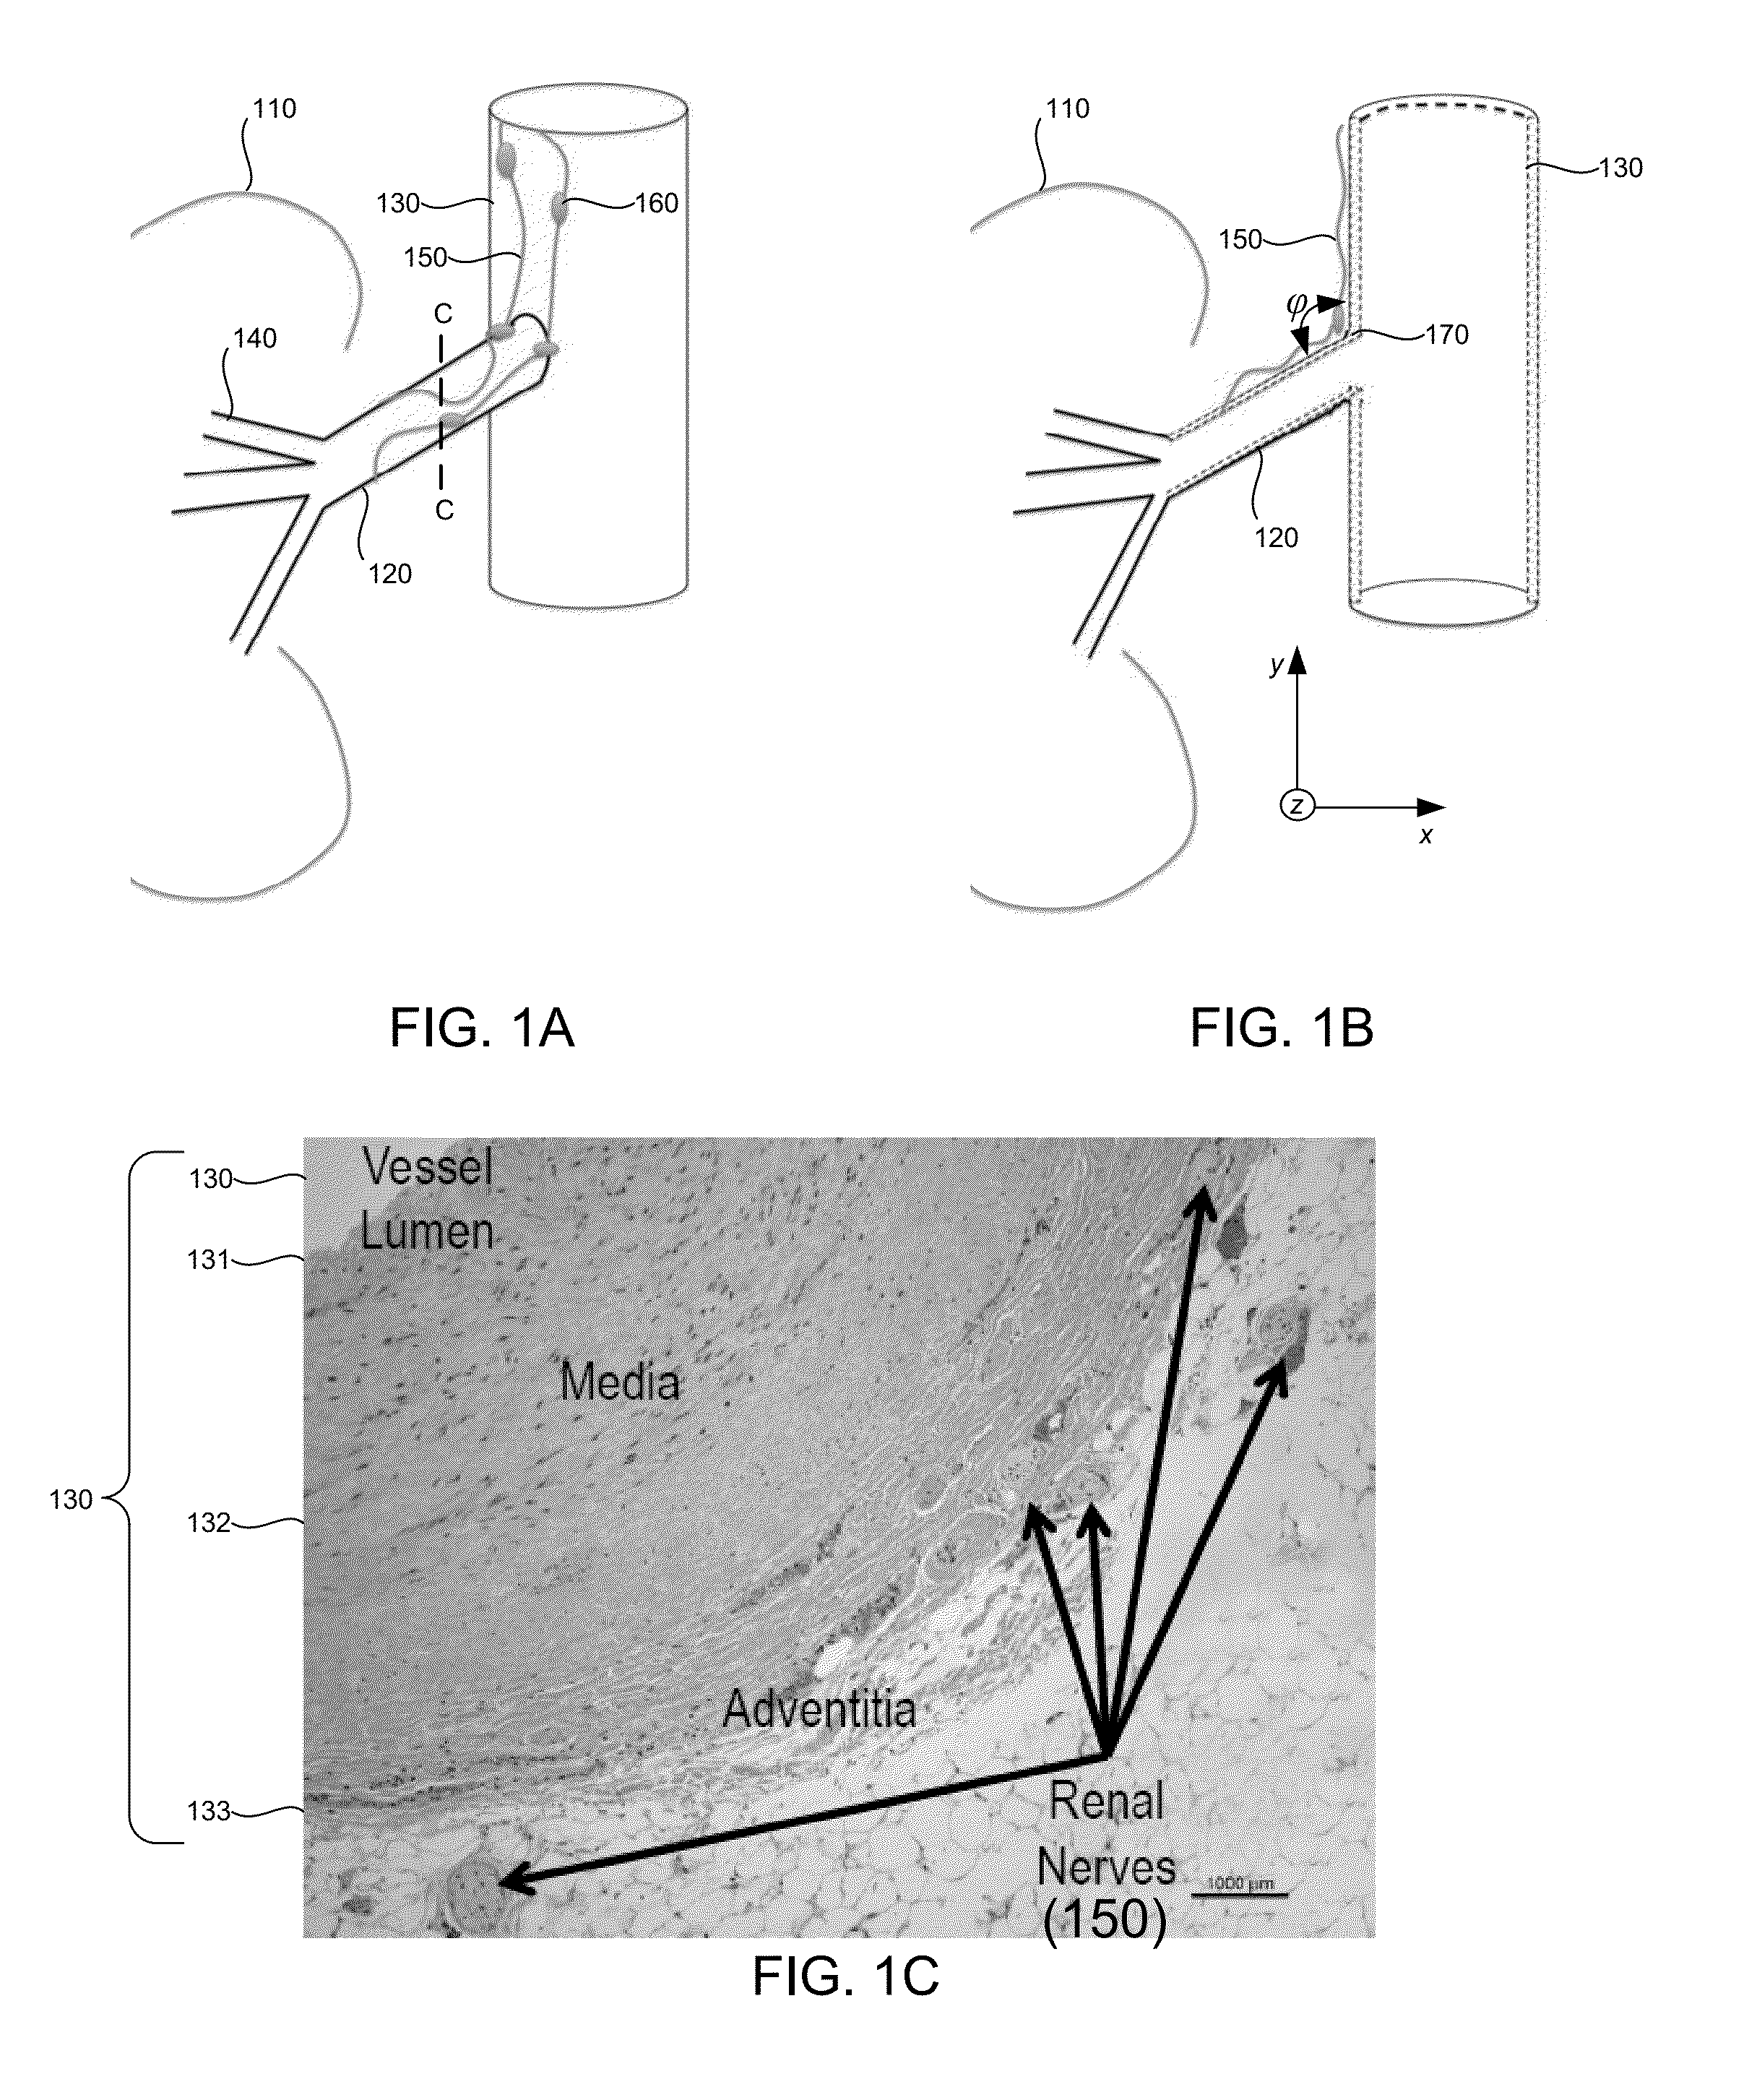 Systems for transcatheter ablation of adventitial or perivascular tissue while preserving medial and intimal vascular integrity through convergence of energy from one or more sources, and methods of making and using same